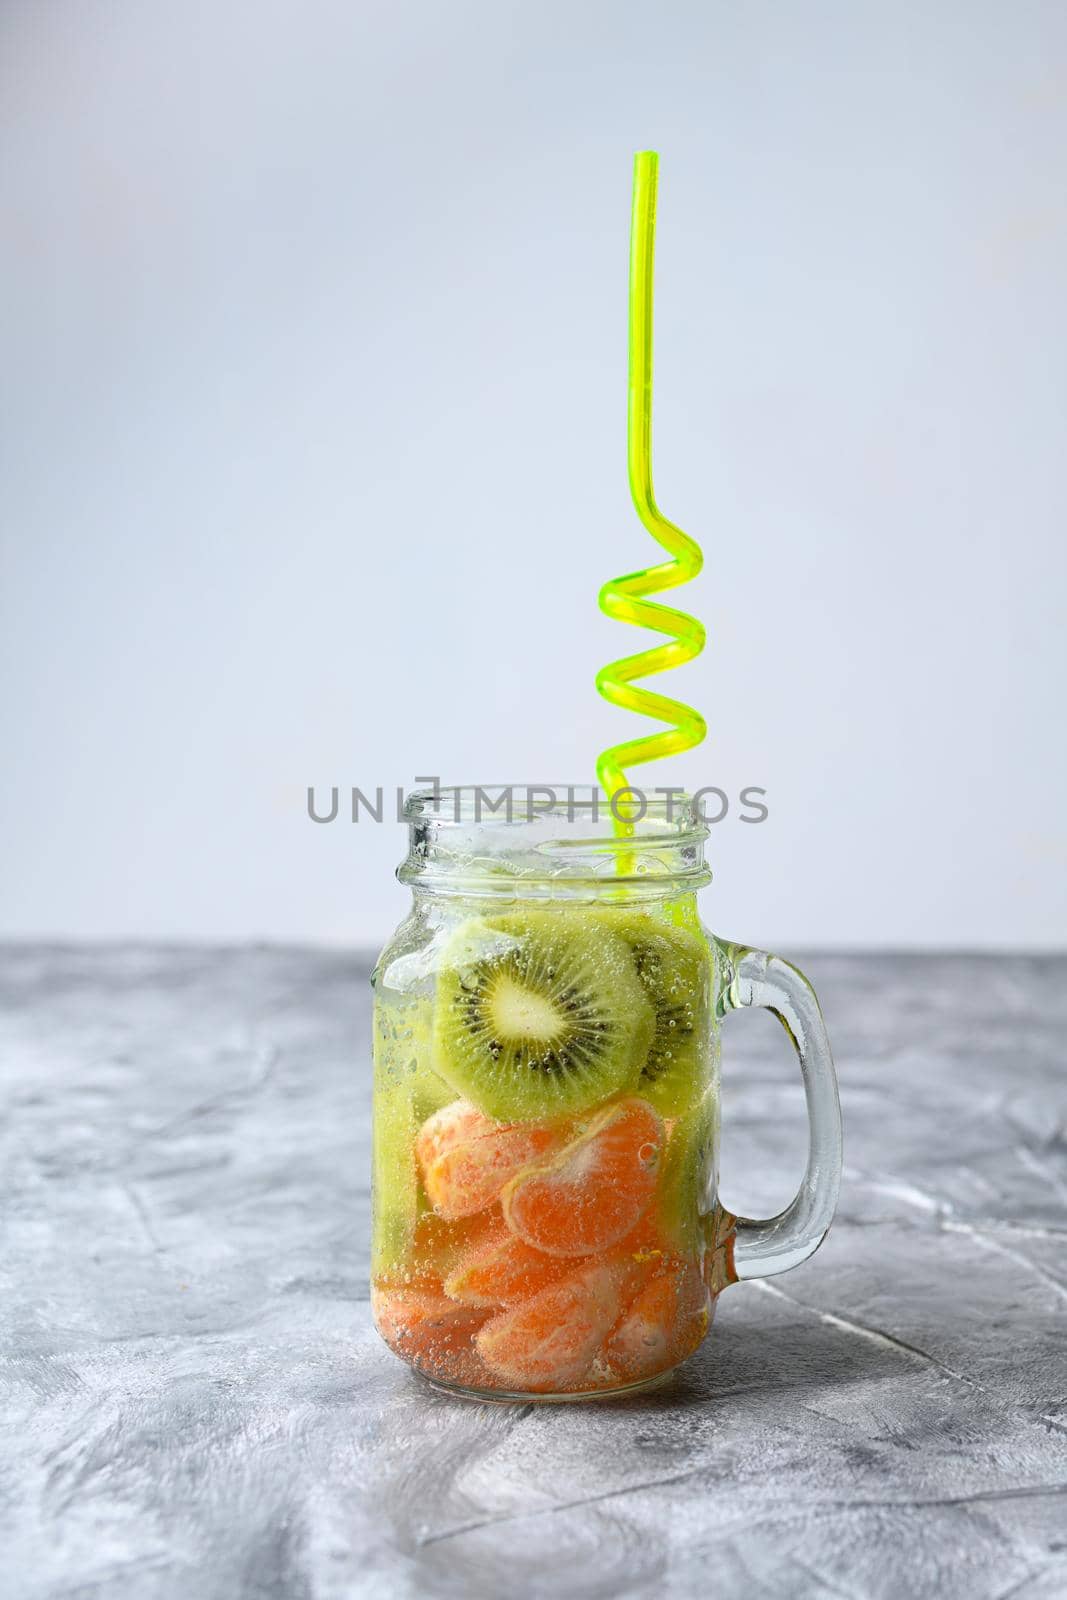 lemonade with citrus and kiwis on gray backgrounds by sashokddt